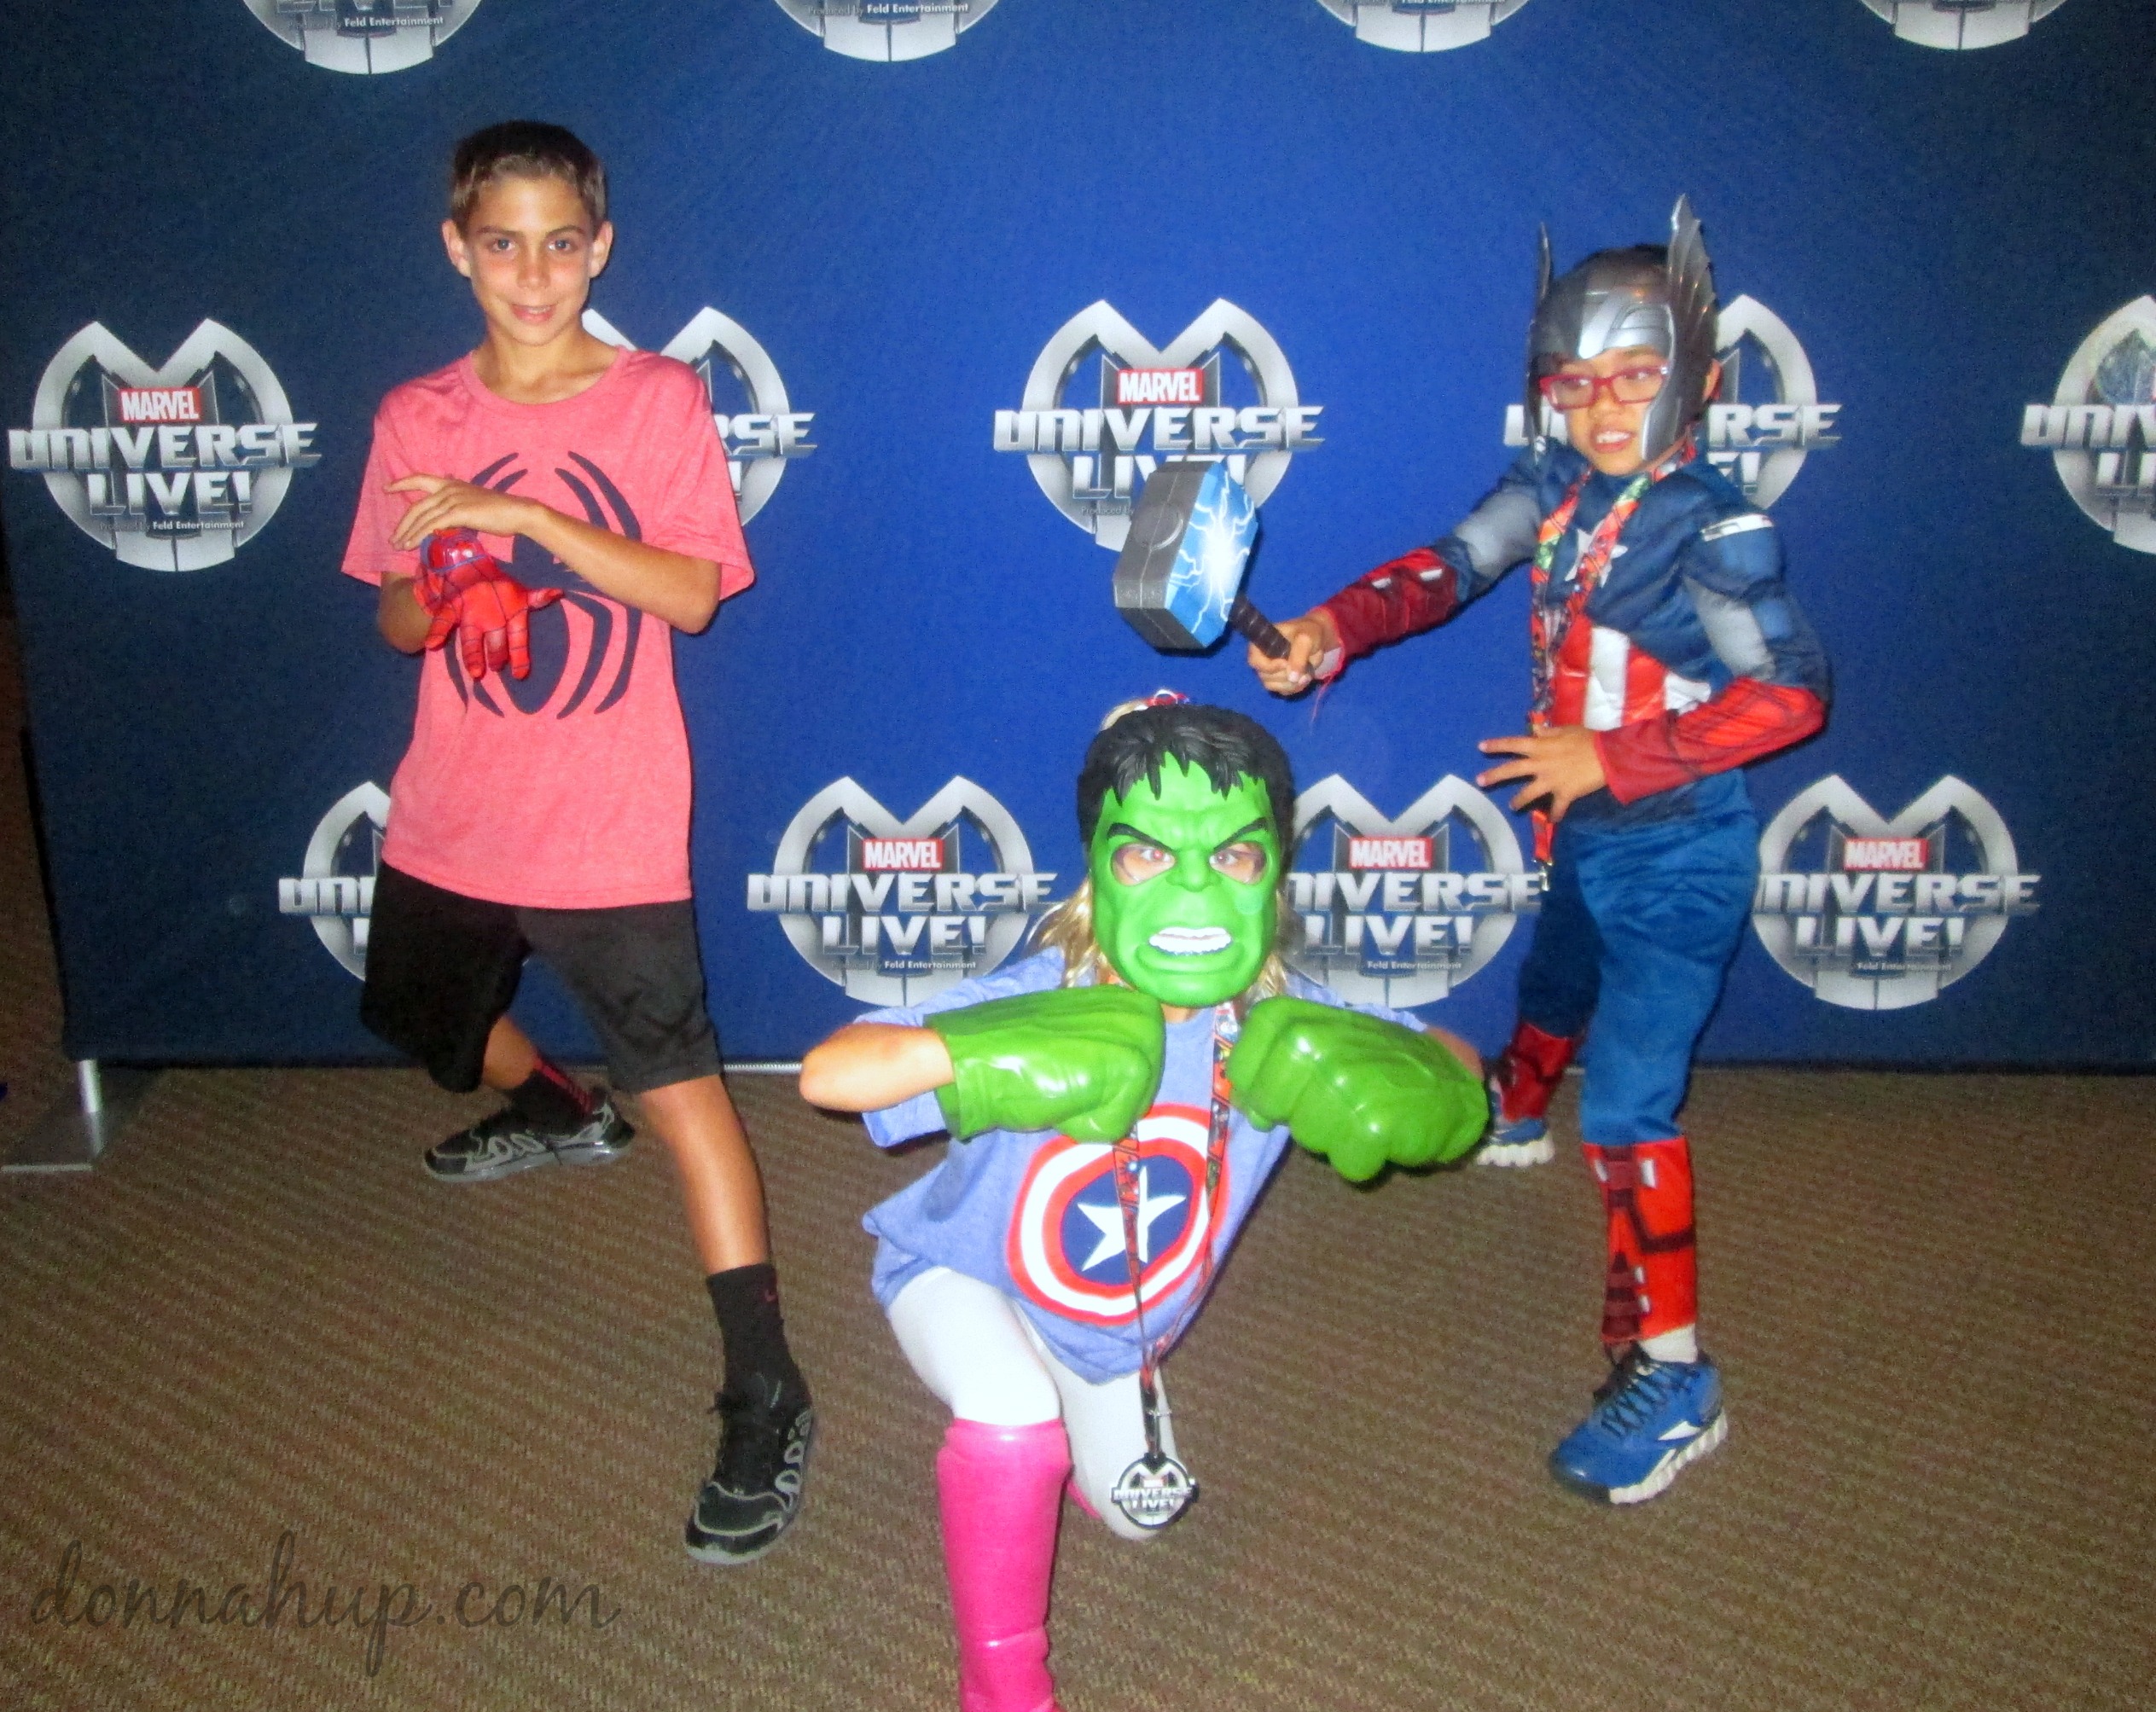 Marvel Universe Live - A Fun Family Experience #MUL